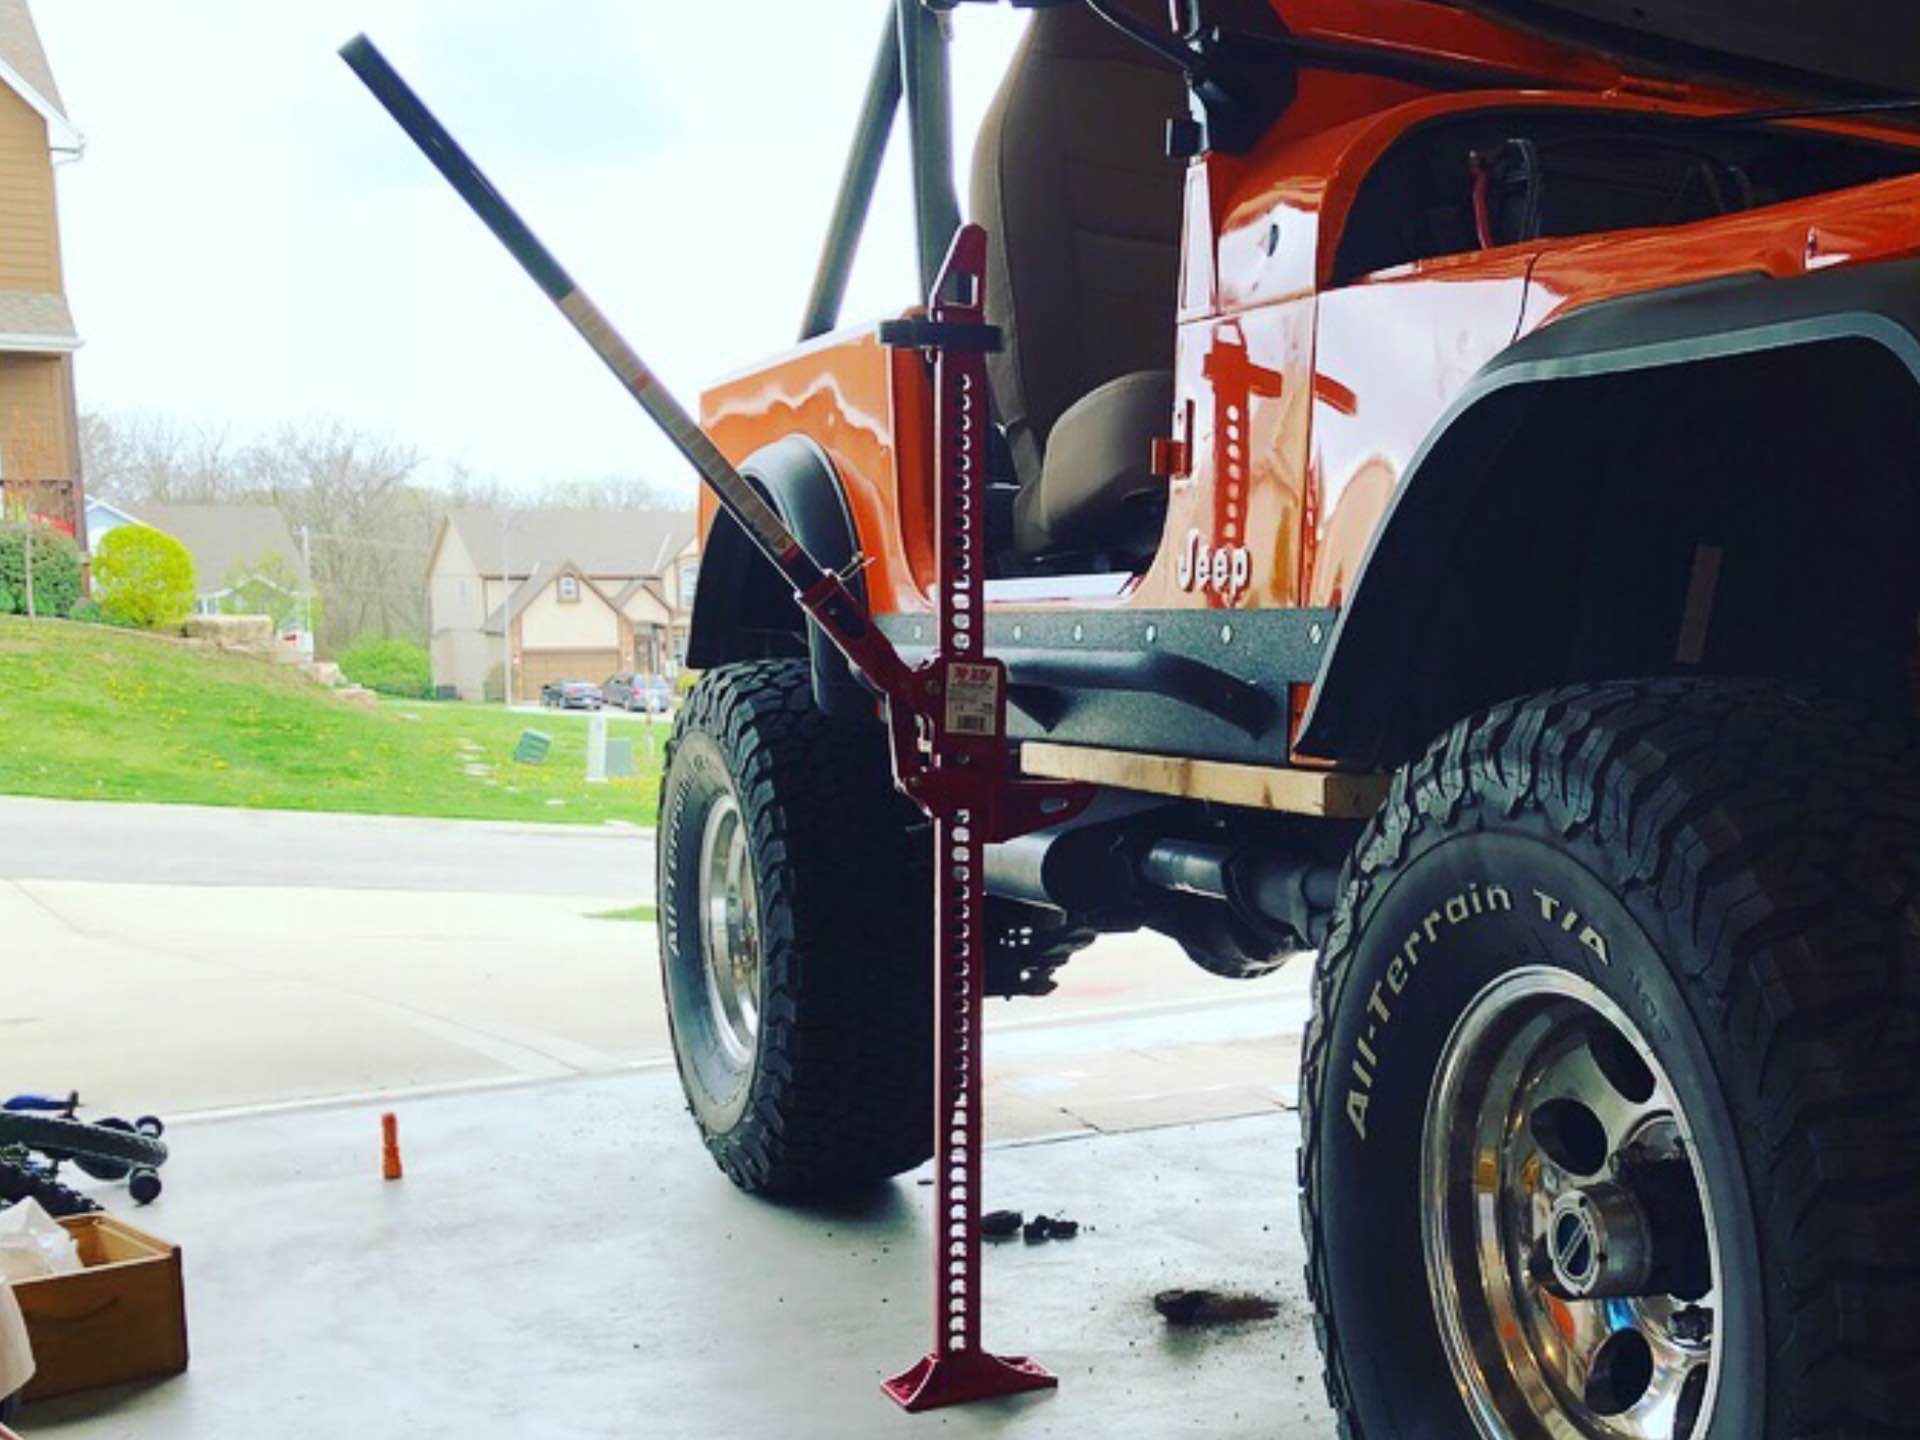 The Hi-Lift all-cast 4x4 jack. ($86 for the 48-inch version)Photo: Shawn Blanc